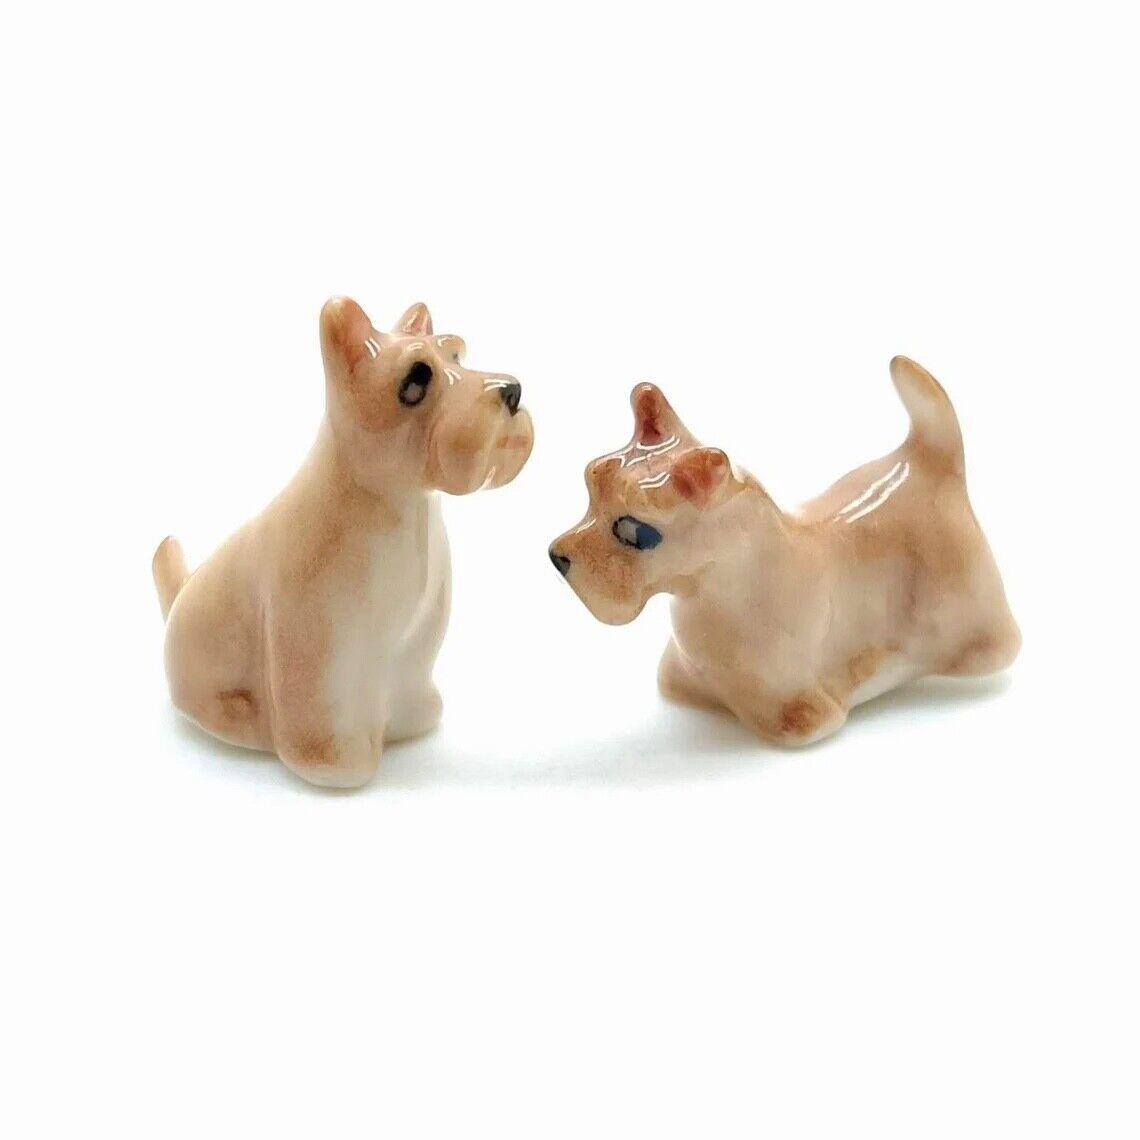 2 Tiny Brown Scottish Terrier Dogs Ceramic Porcelain Figurines Statue